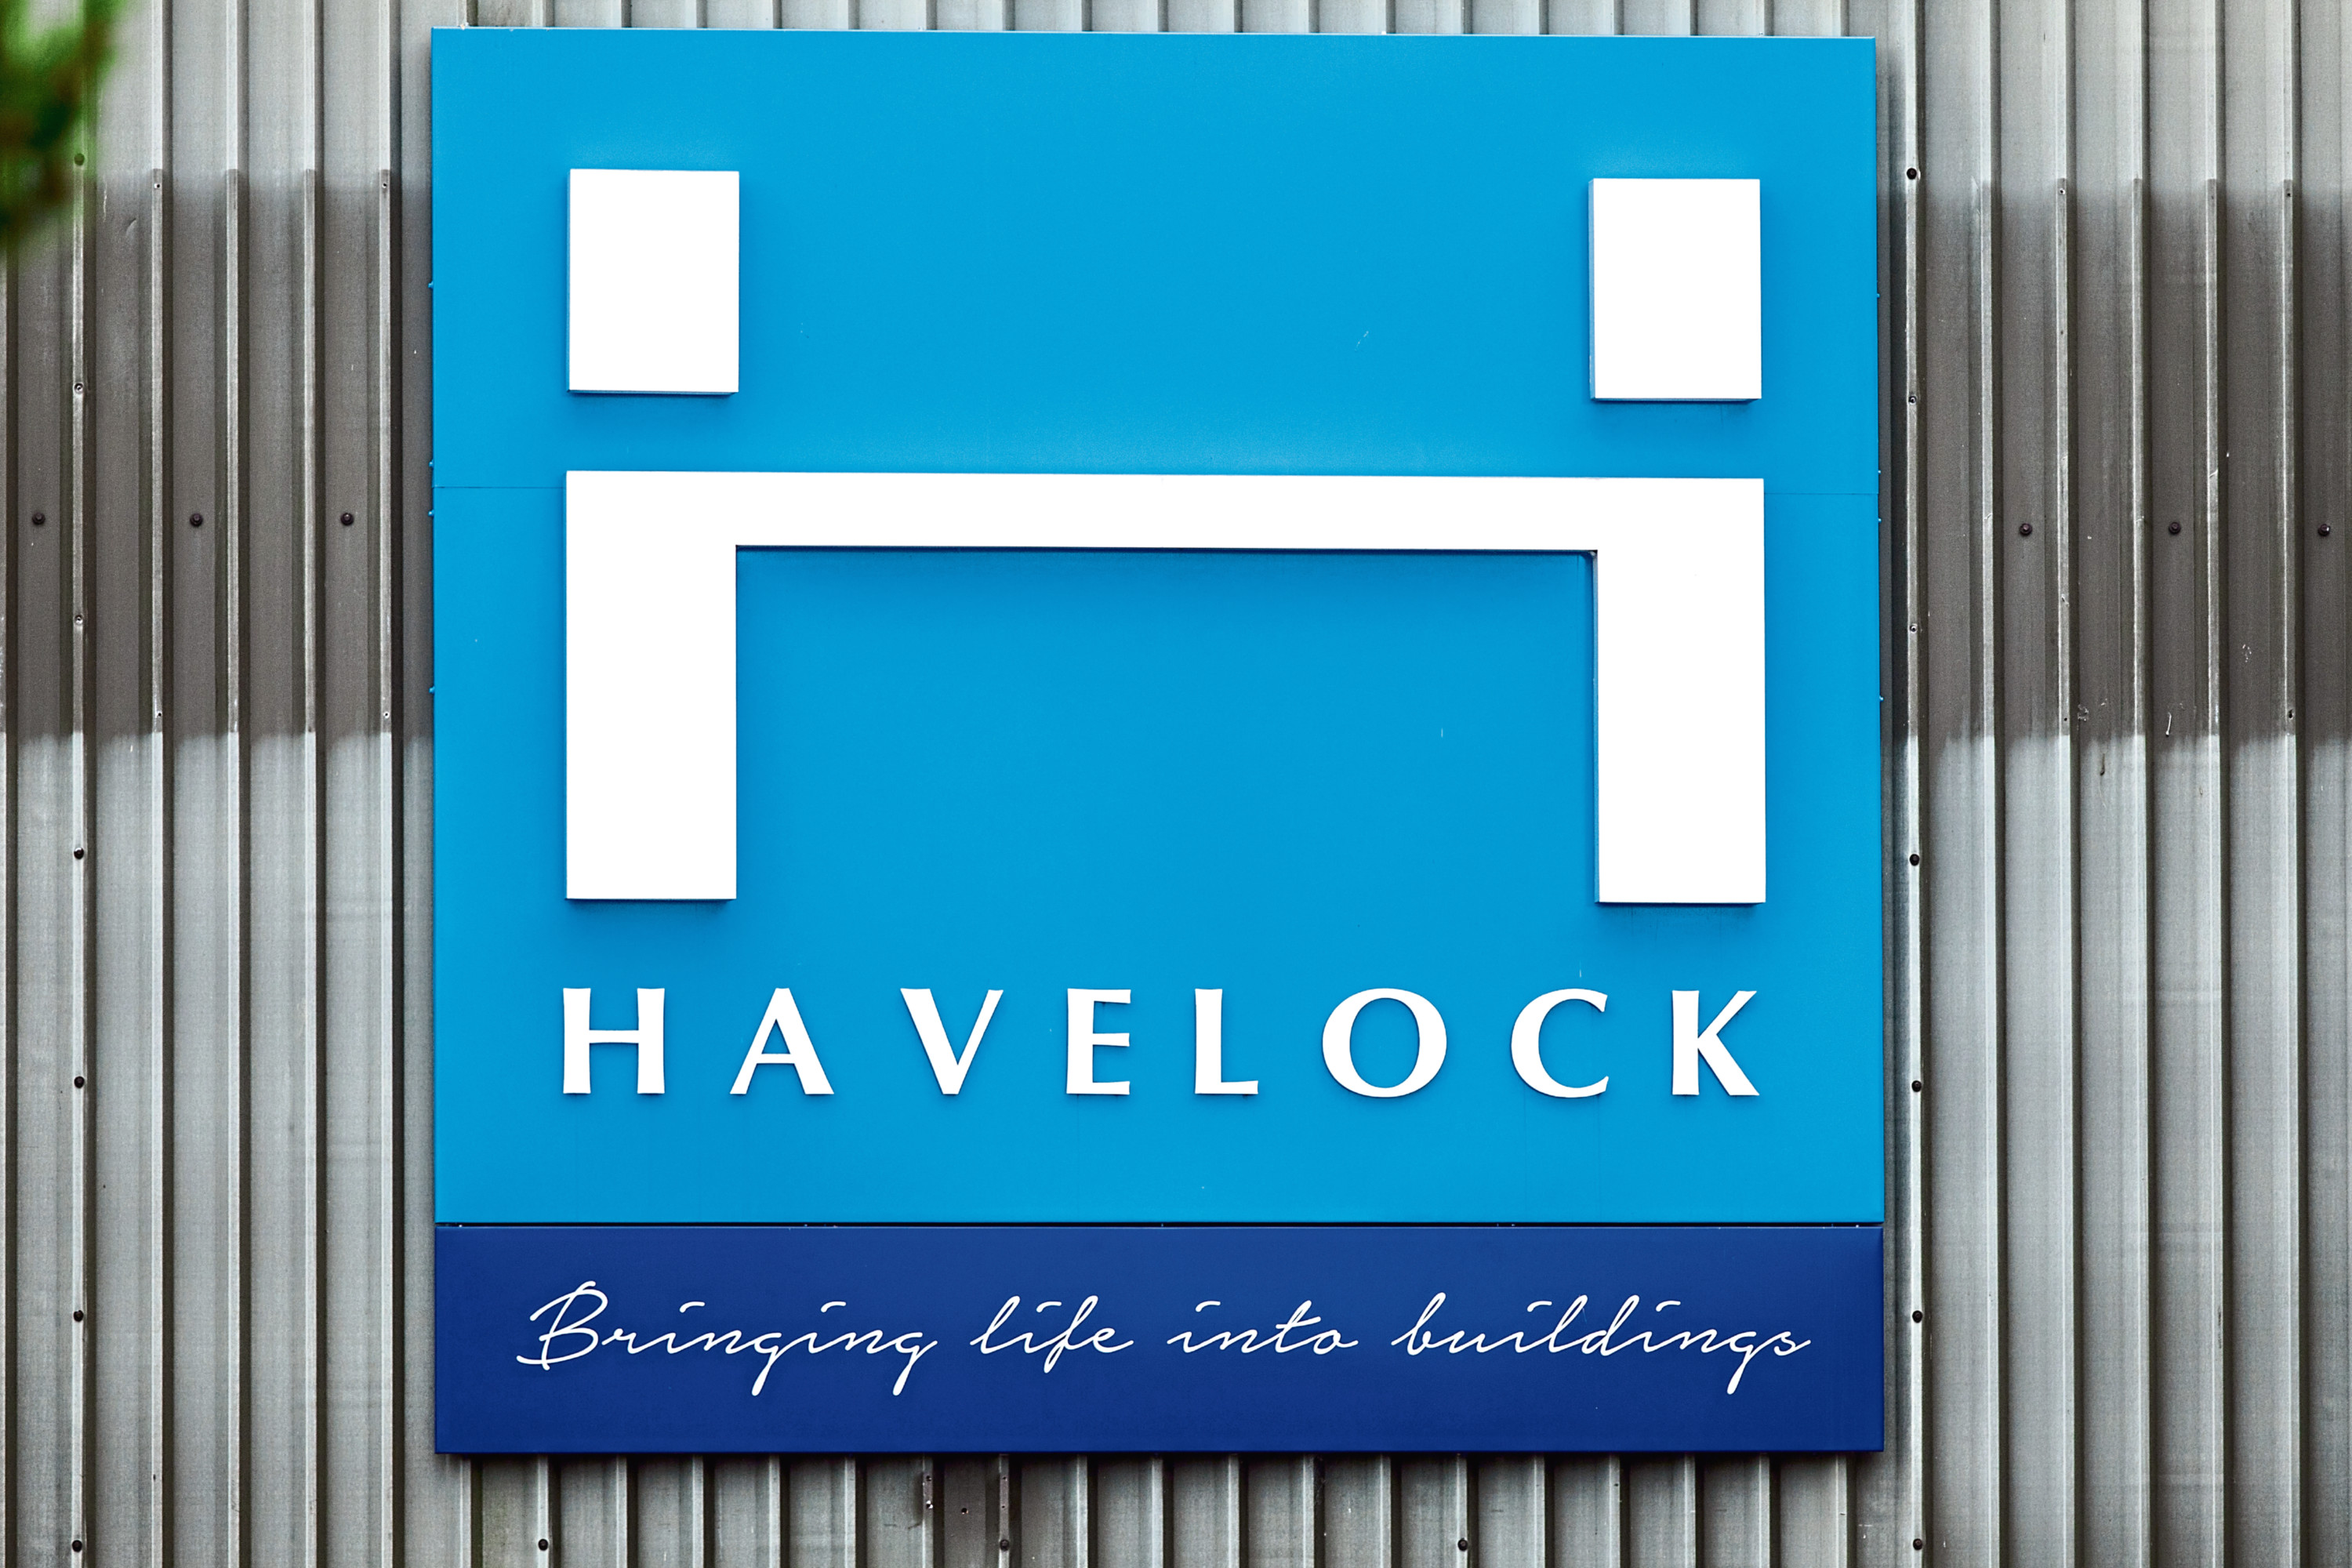 Havelock went into administration at the start of August